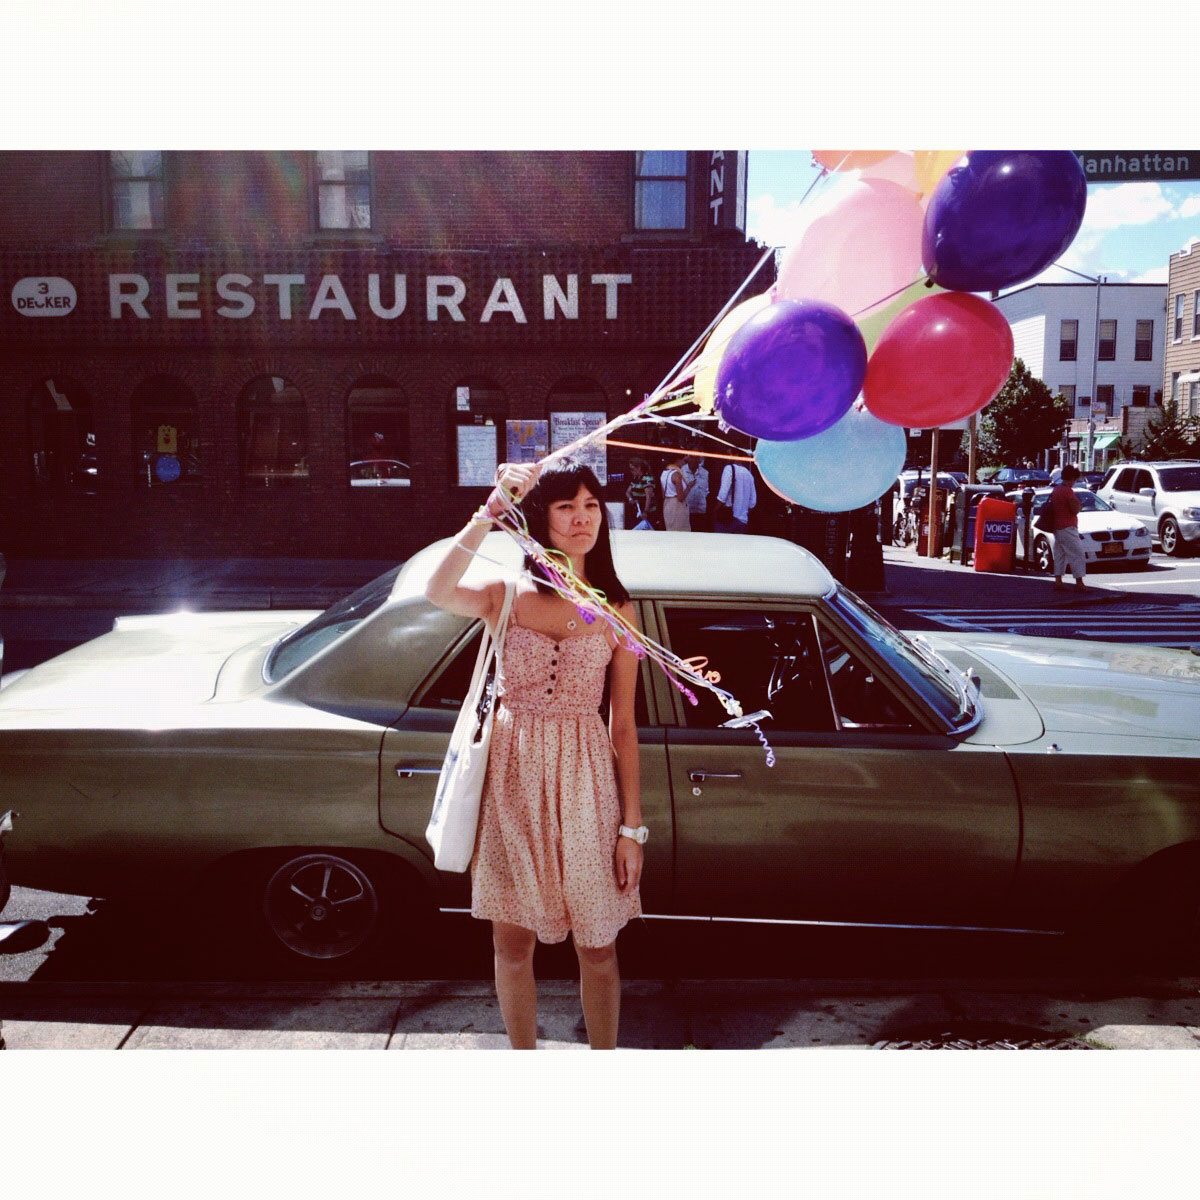 Daniel-Arnold-woman with balloons instagram